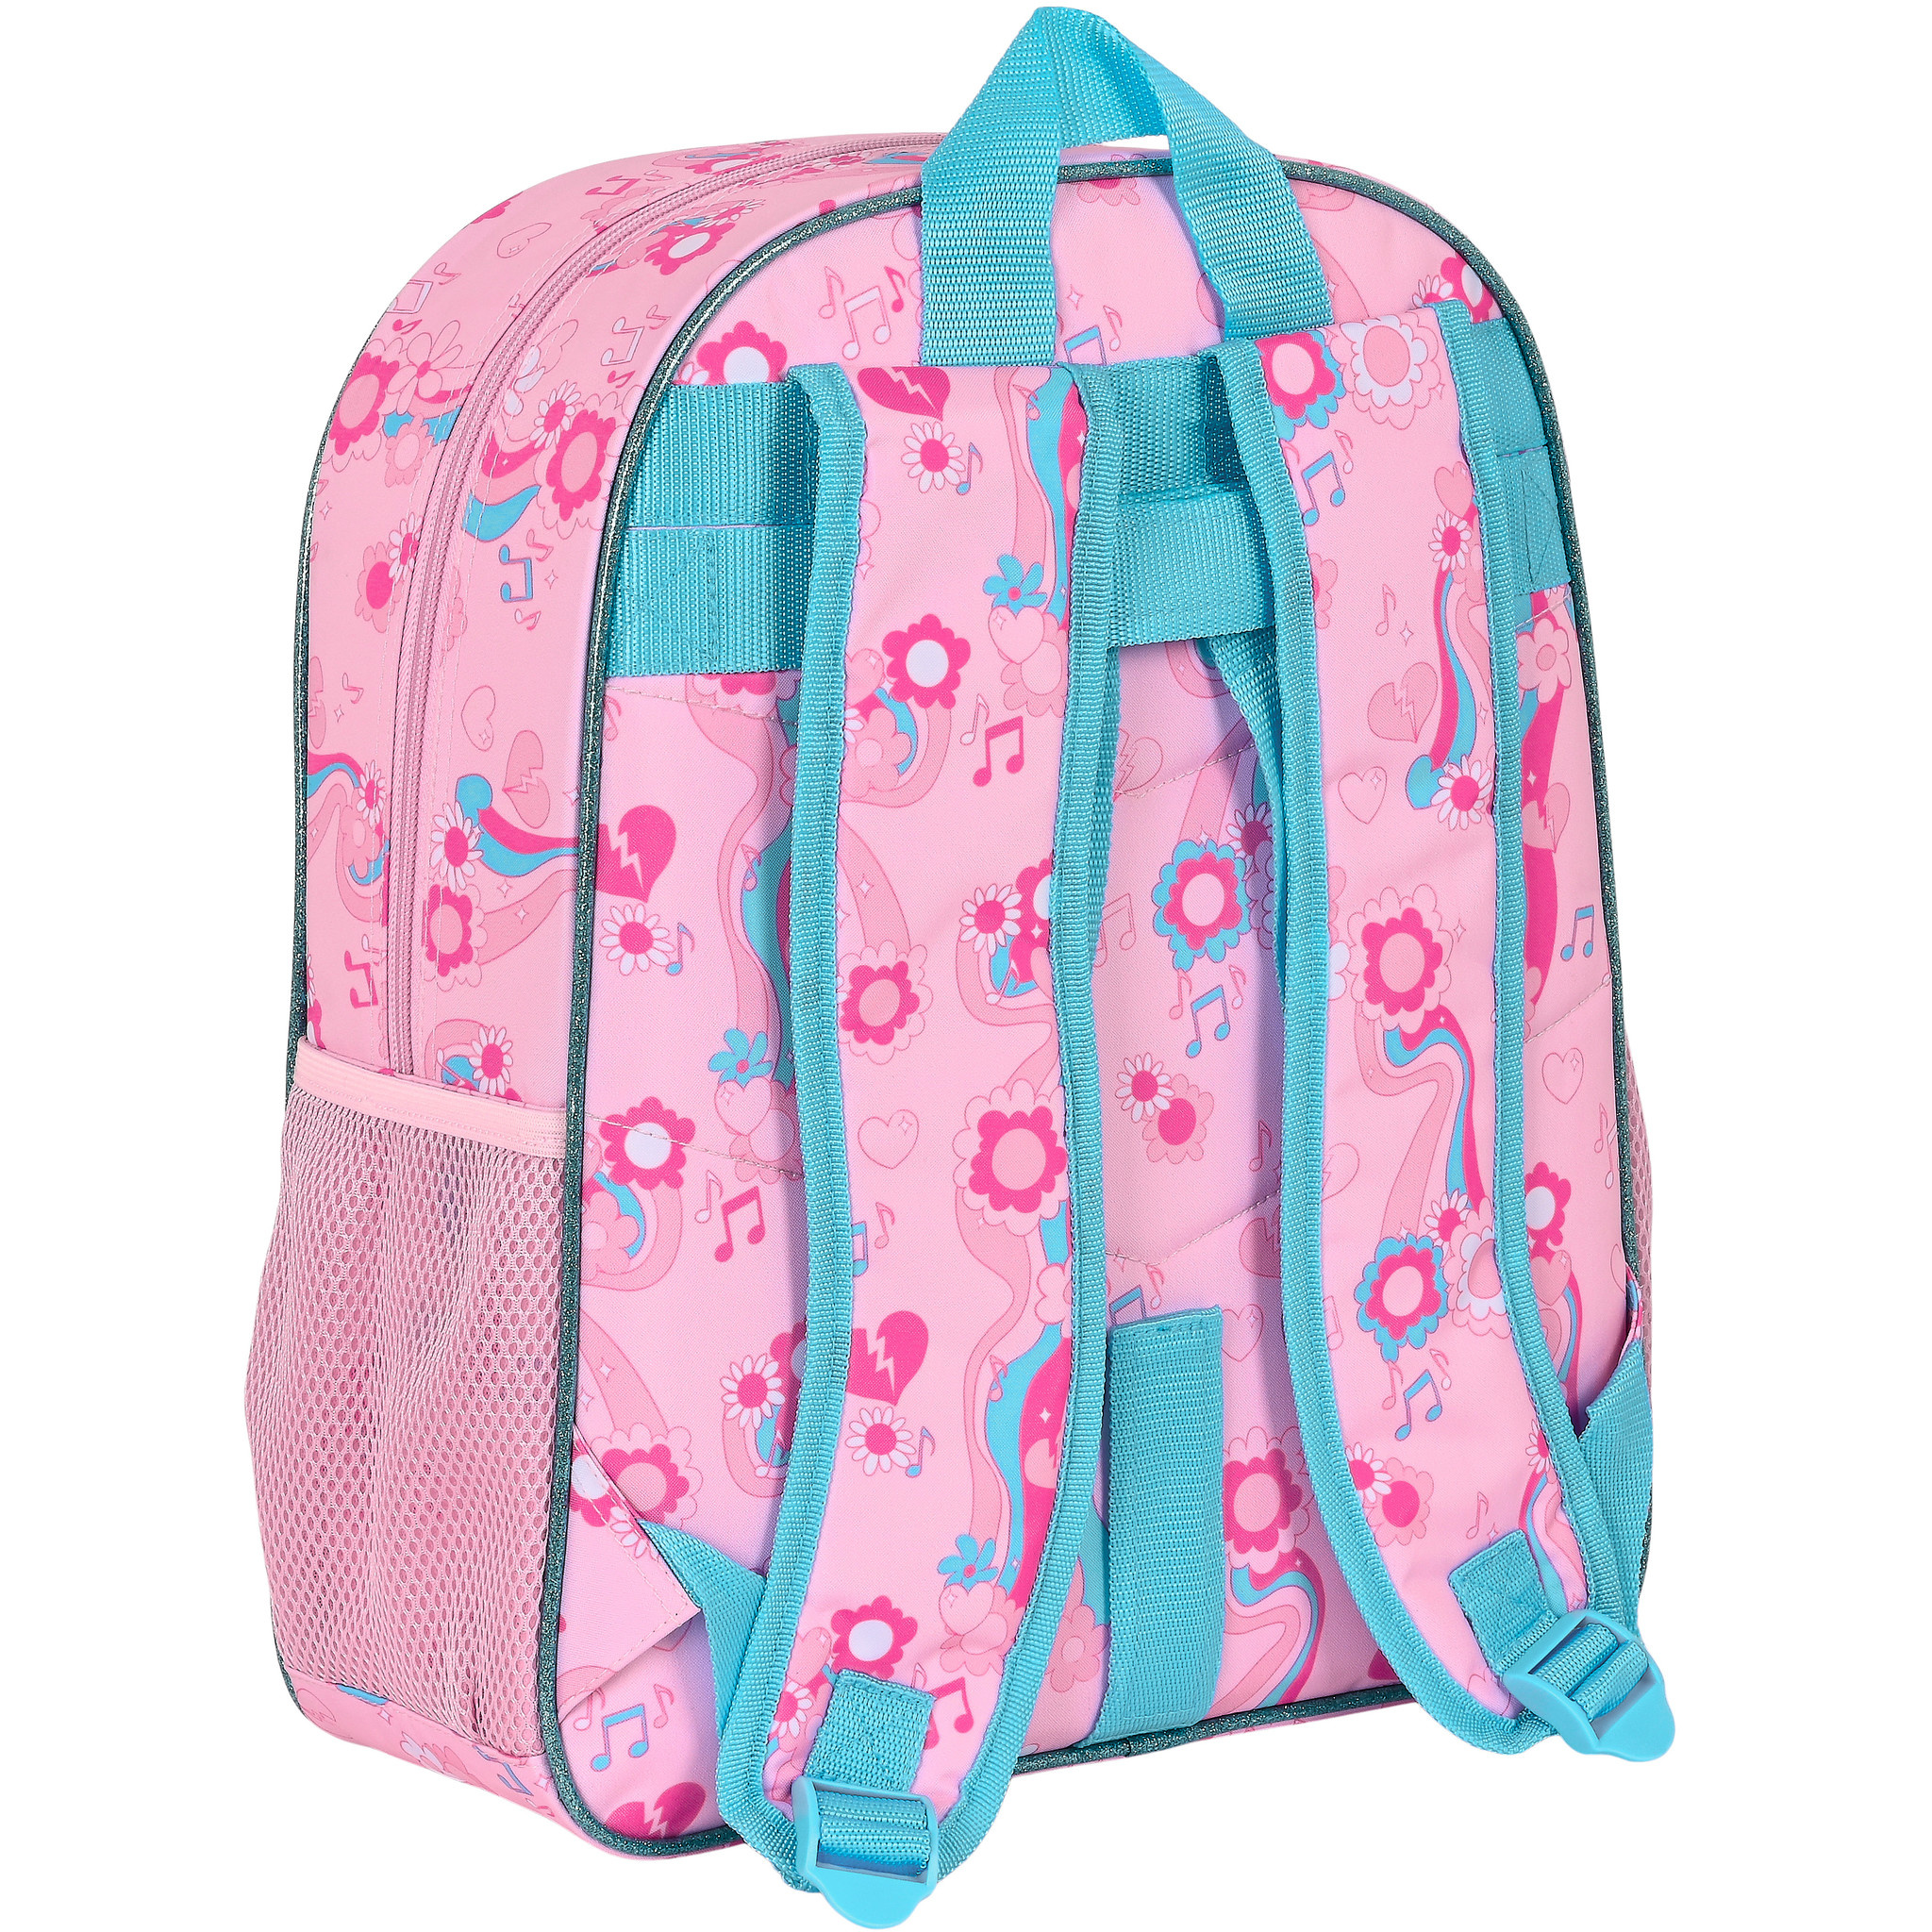 L.O.L. Surprise Backpack, Glow Girl - 38 x 32 x 12 cm - Polyester